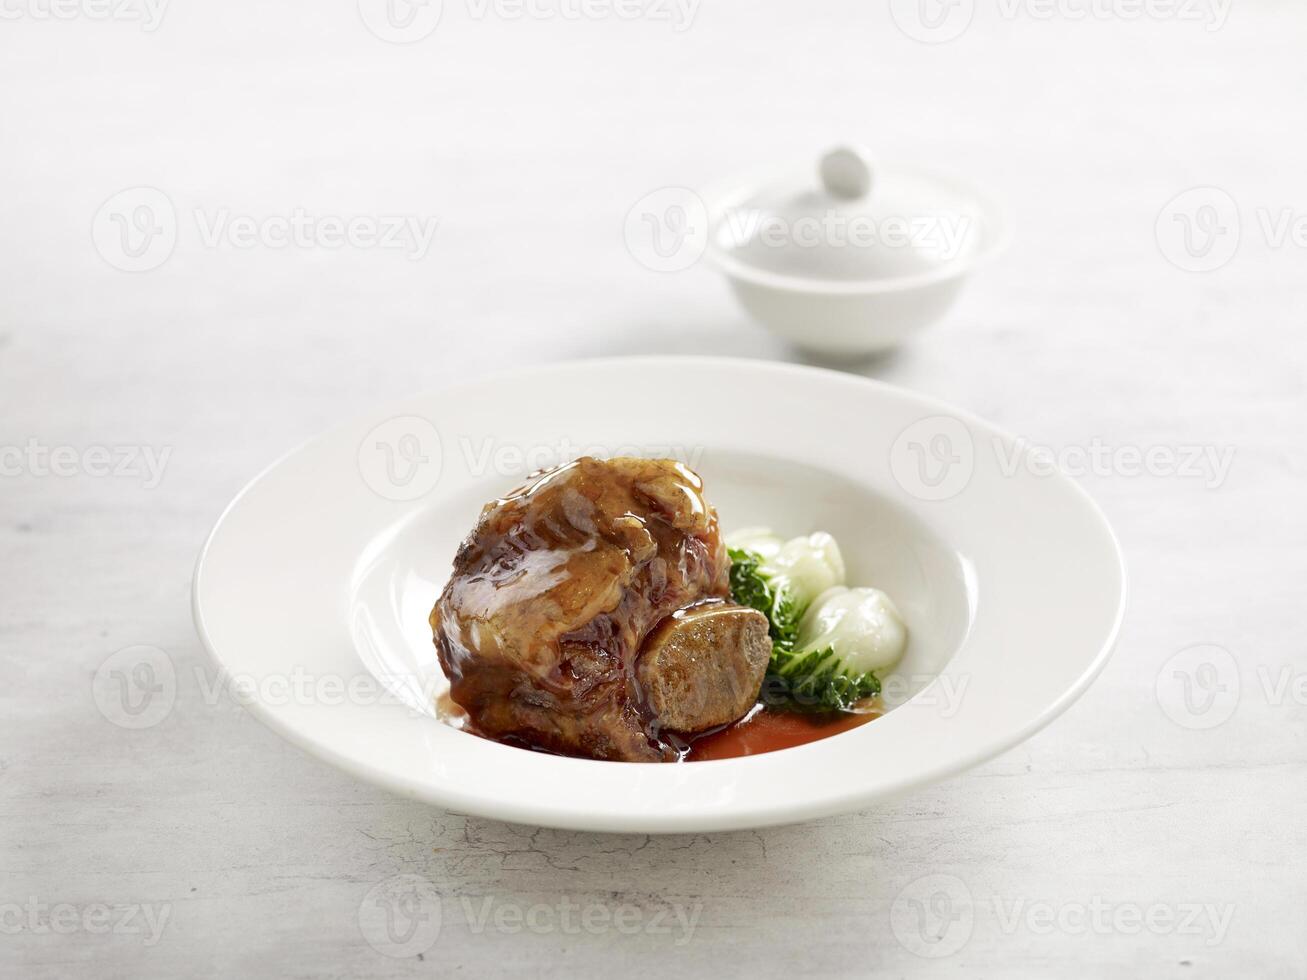 Braised US Angus Beef Short Rib in Brown Sauce served in a plate side view on grey marble background USA Food photo